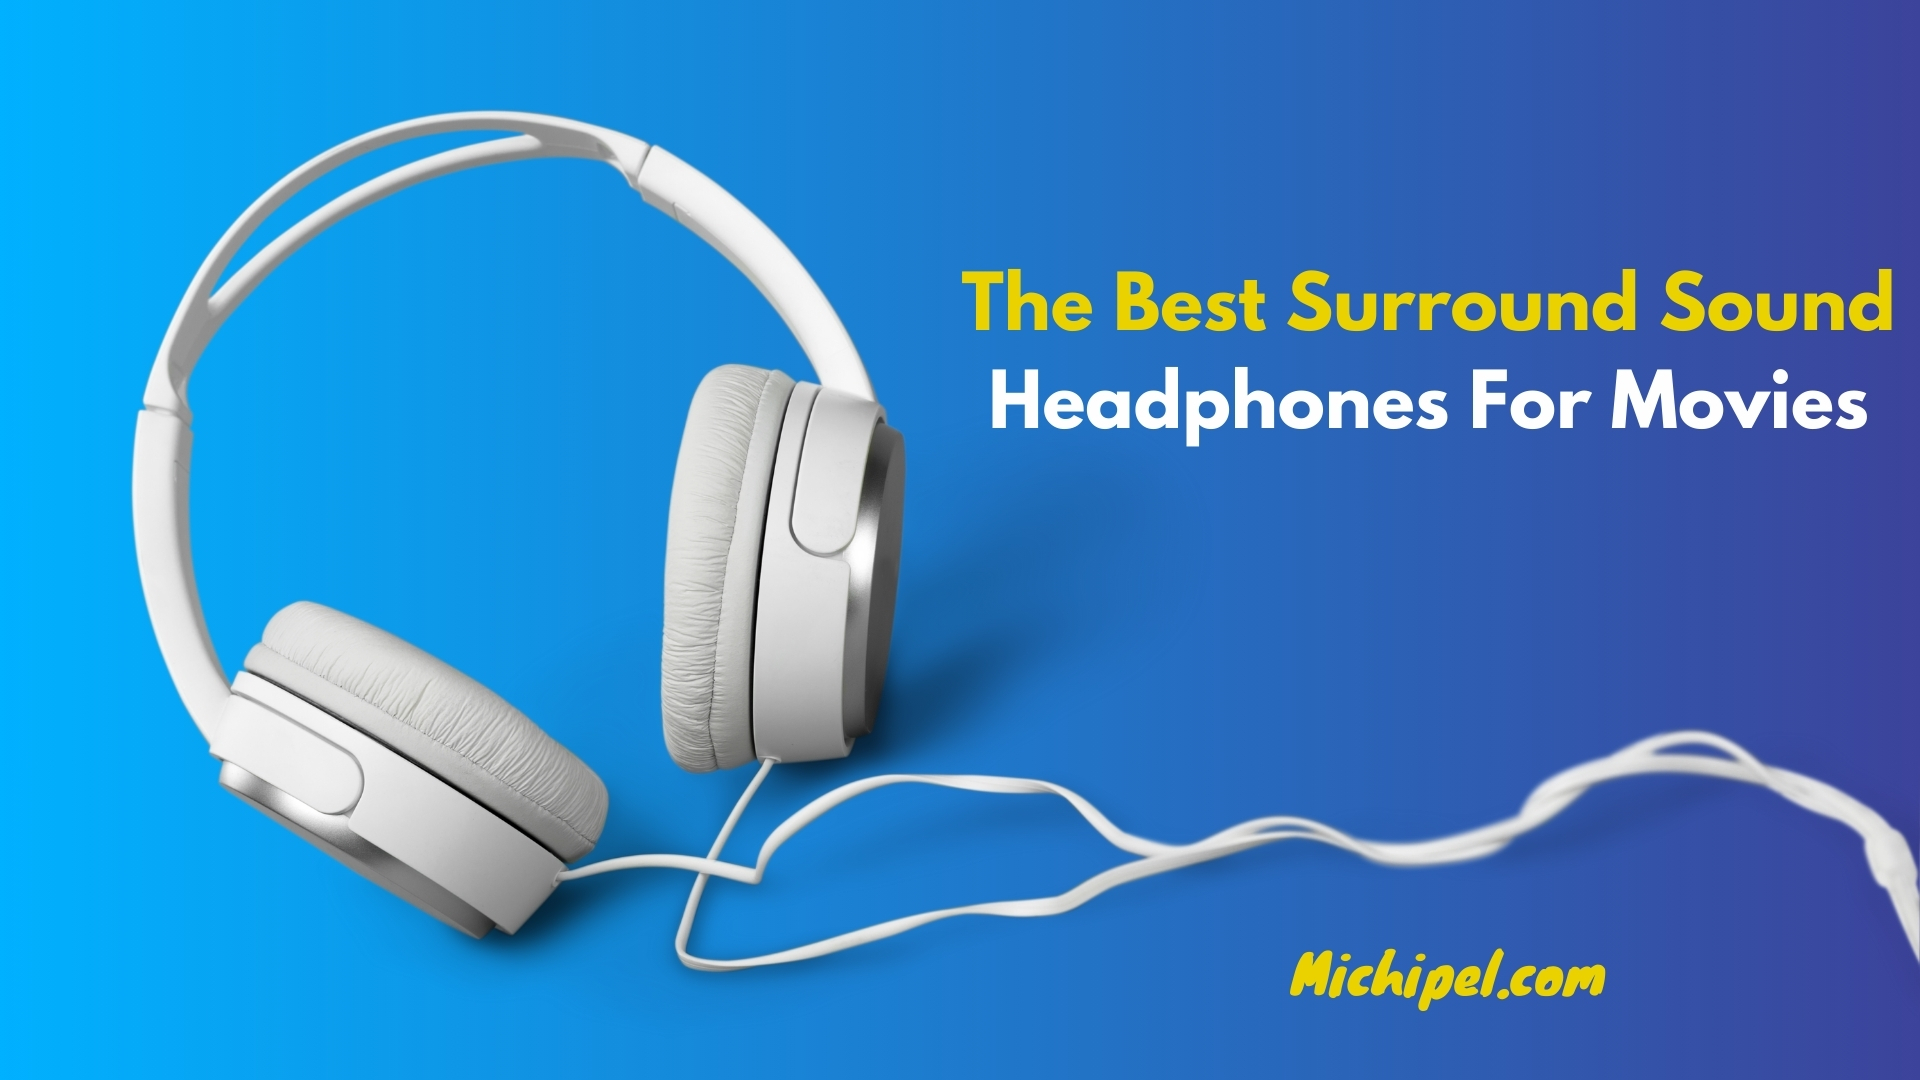 The Best Surround Sound Headphones for Movies